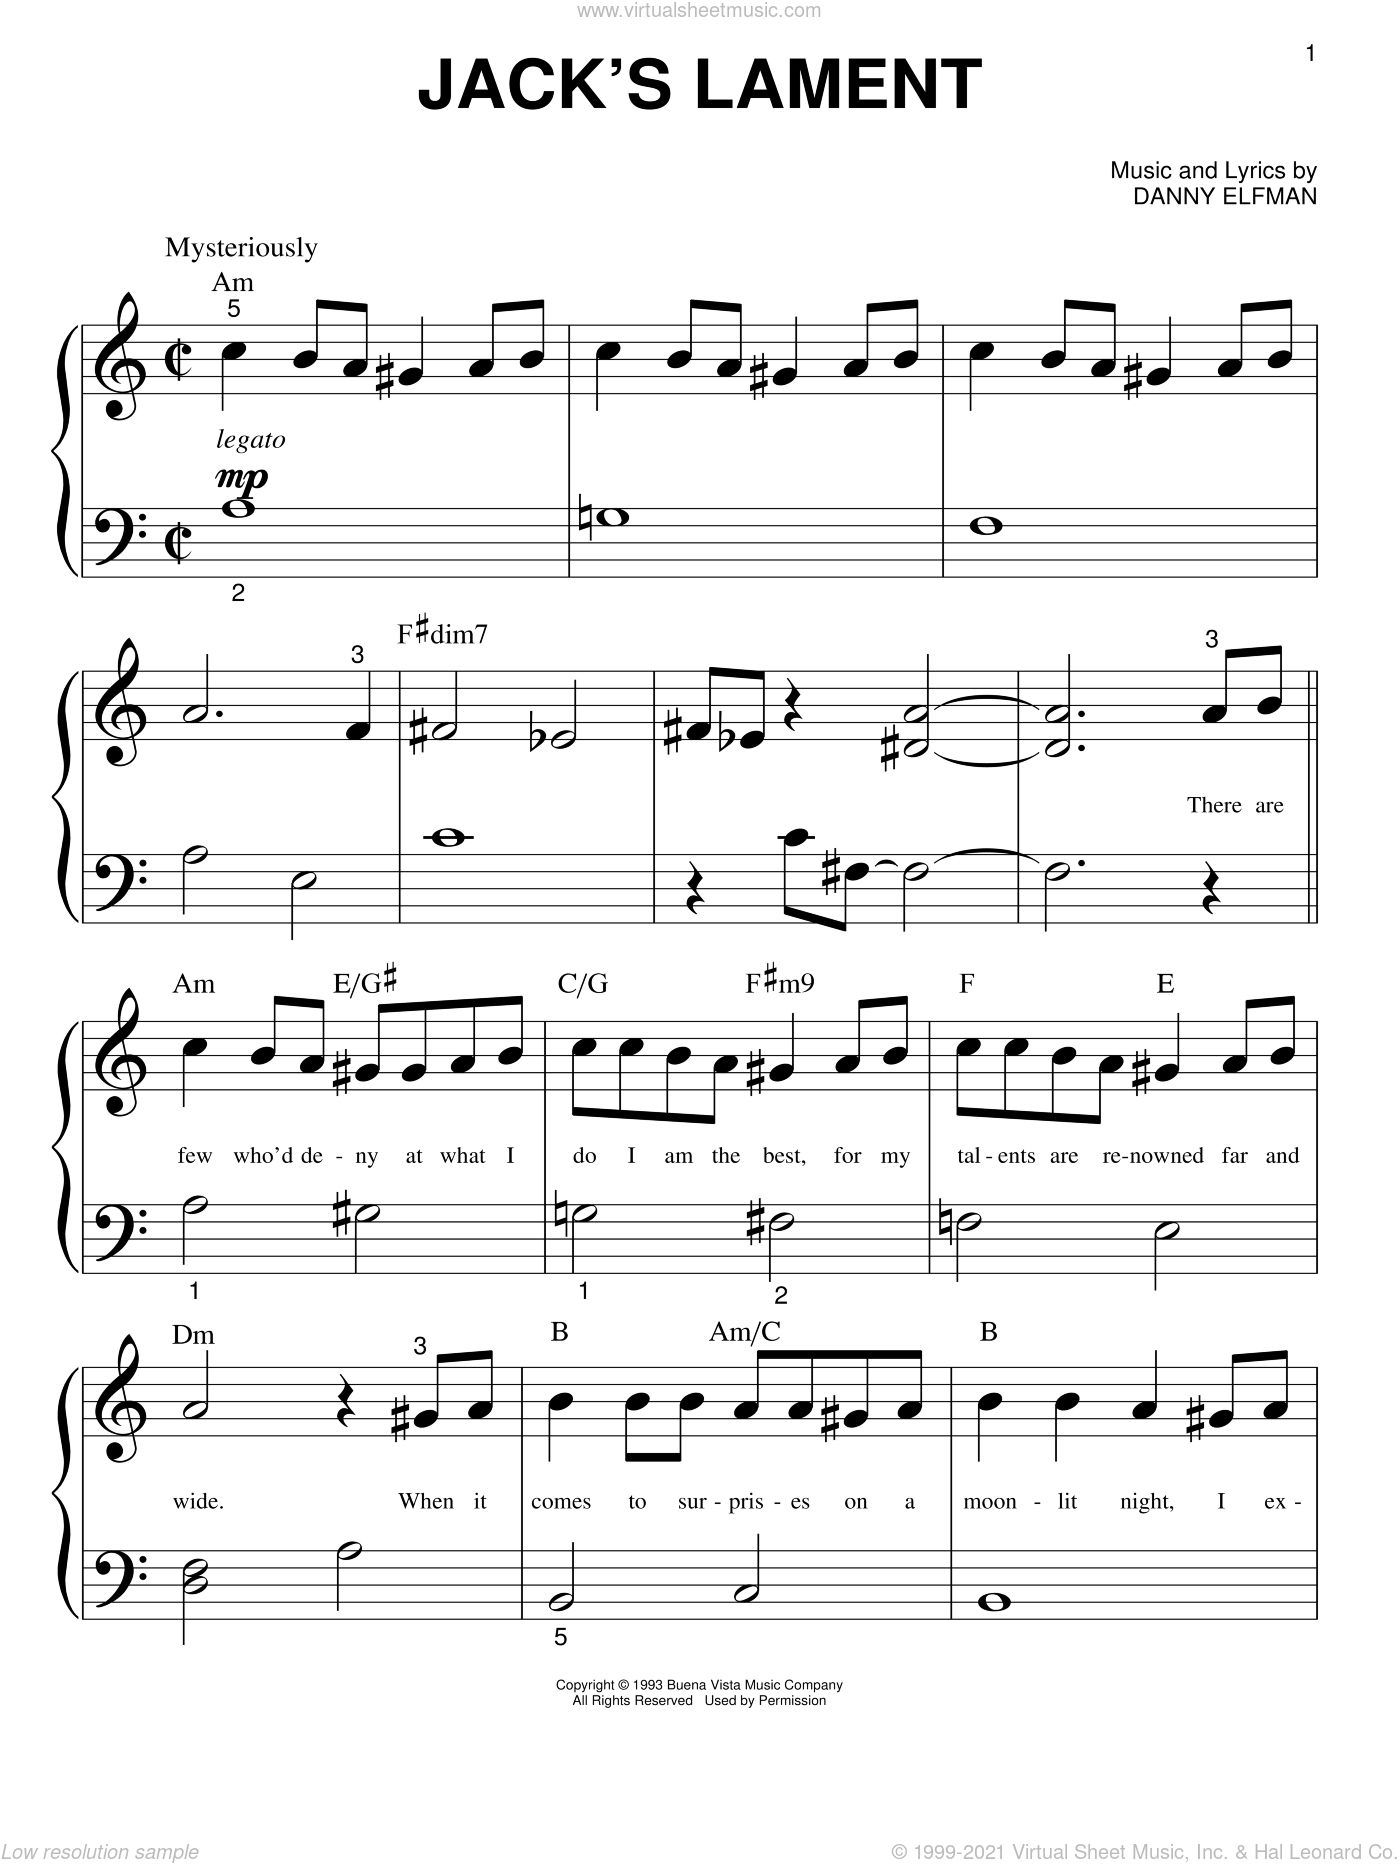 Elfman - Jack's Lament (from The Nightmare Before Christmas) sheet music for piano solo (big ...